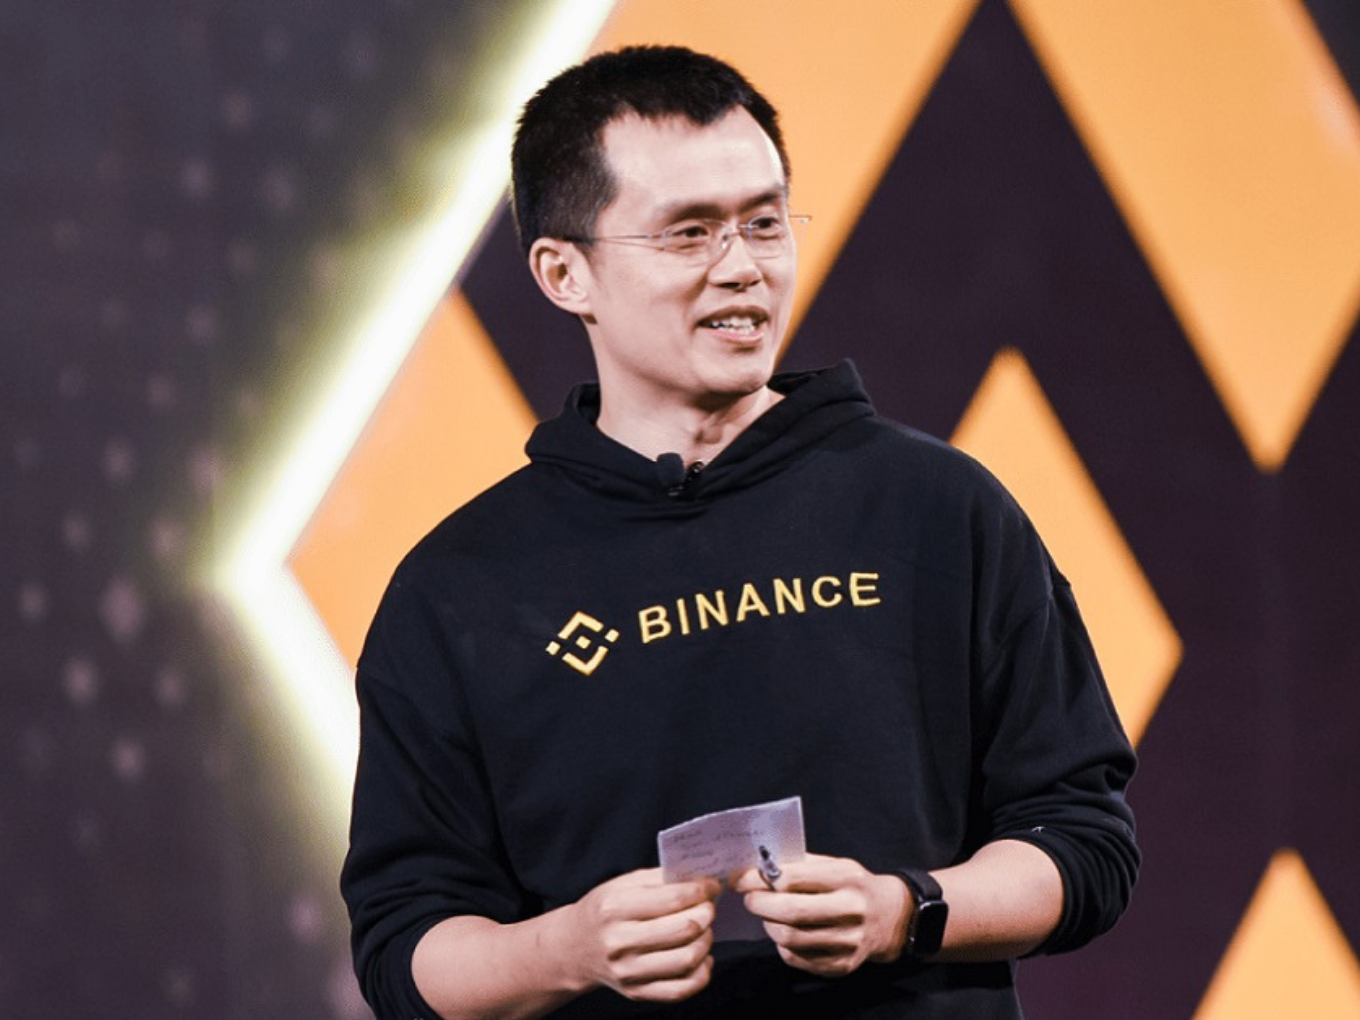 India Will Be A Natural Frontrunner For Web 3 Startups: Binance CEO Changpeng Zhao